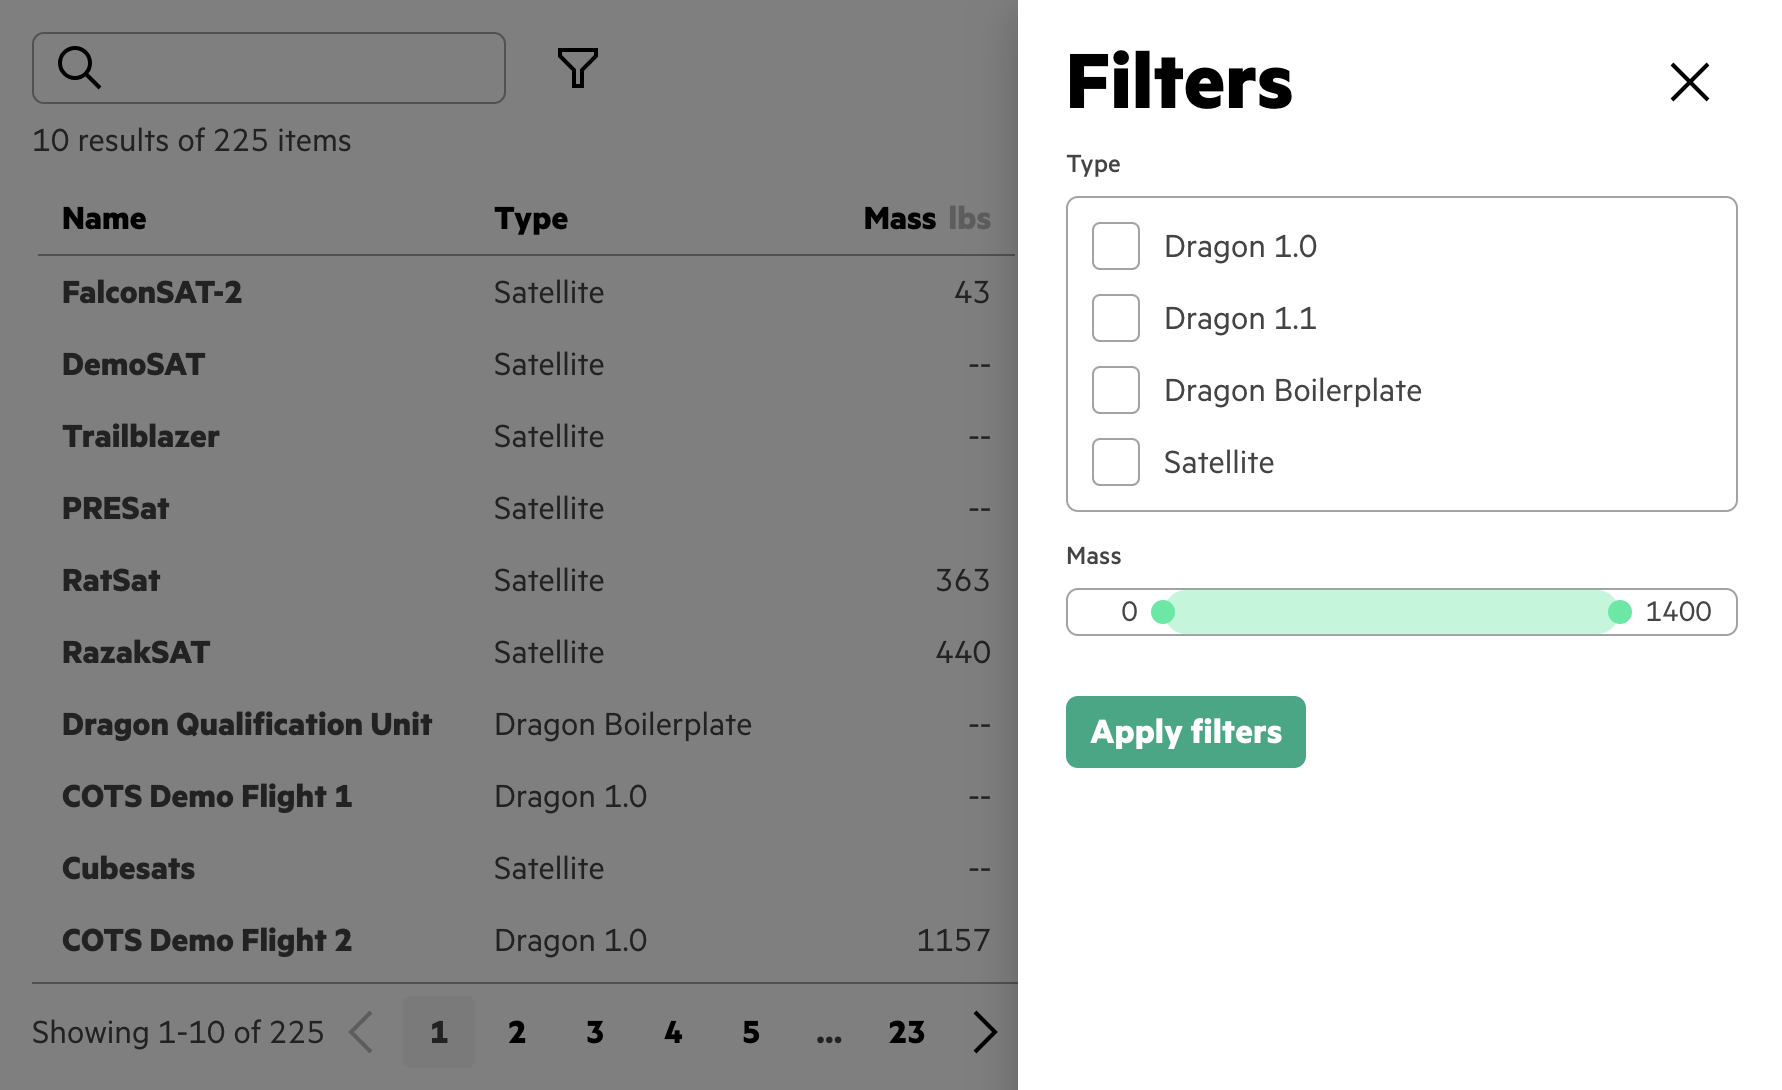 Filters for type and mass displayed in a drop over a datatable presenting SpaceX data.